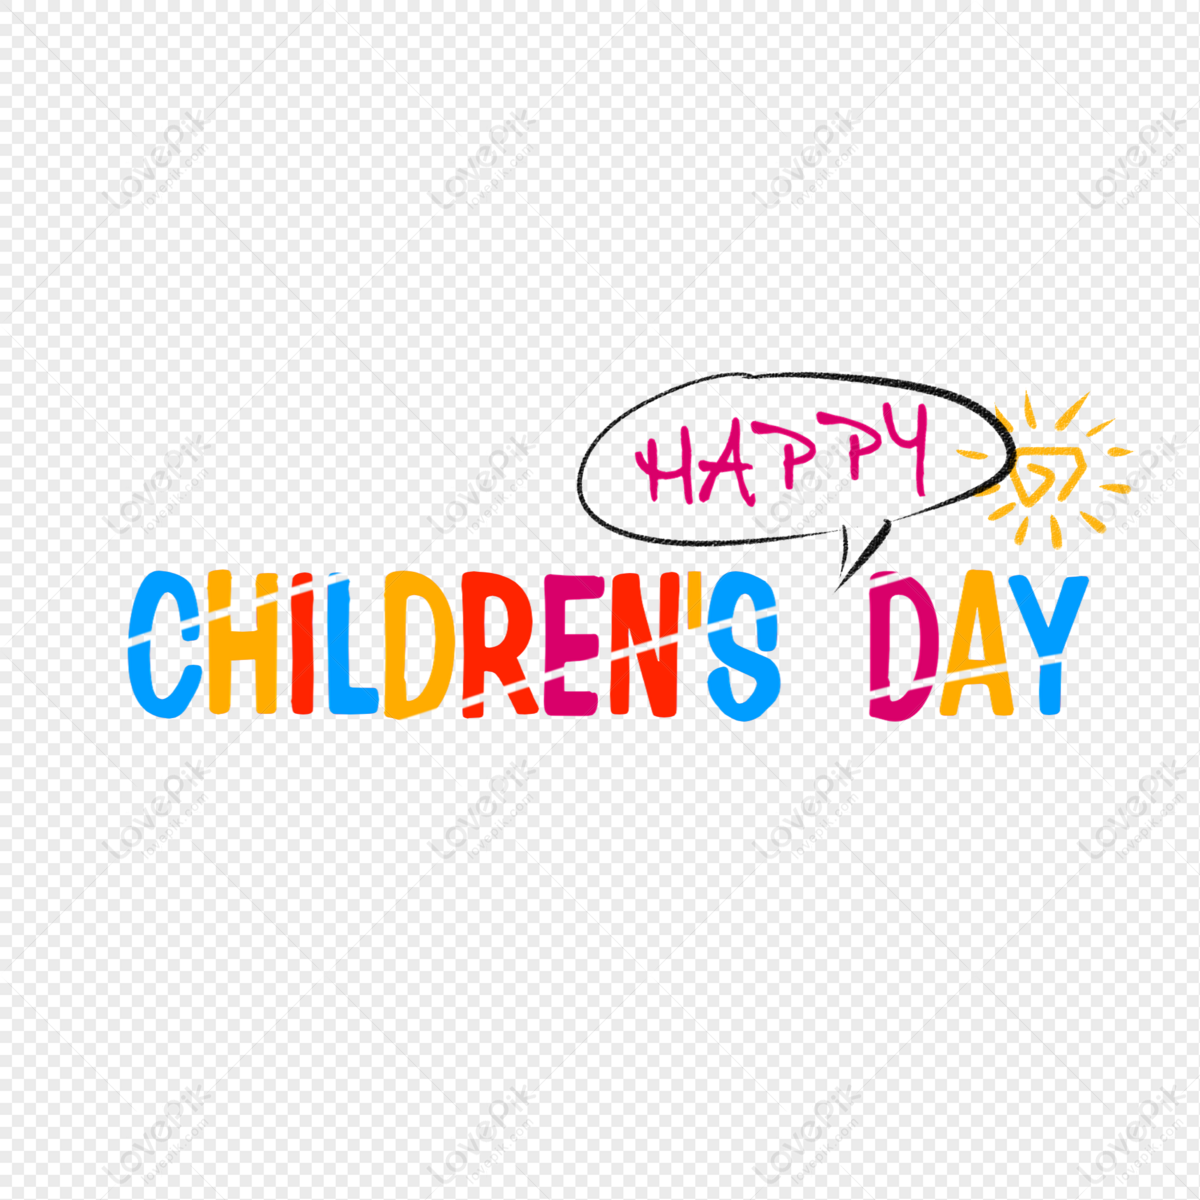 Happy Childrens Day PNG Images With Transparent Background | Free ...